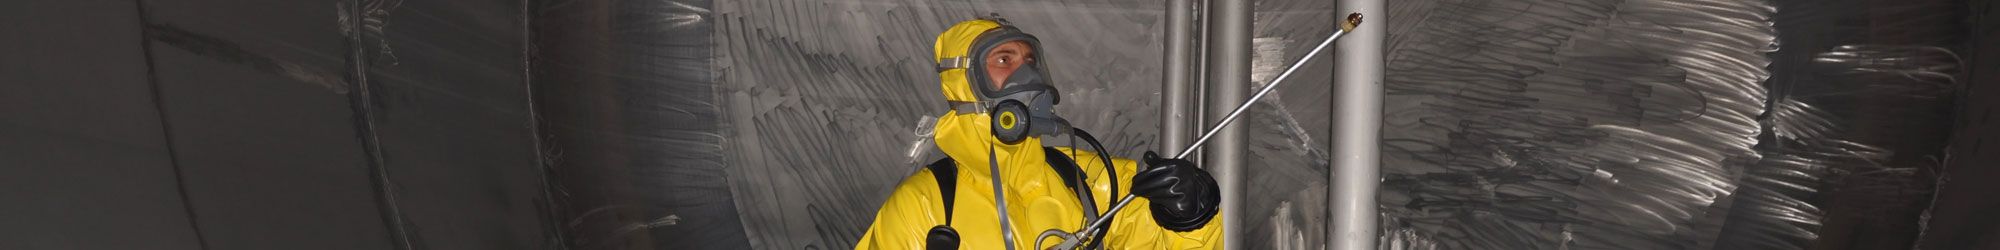 Industrial factory cleaning in safety suit